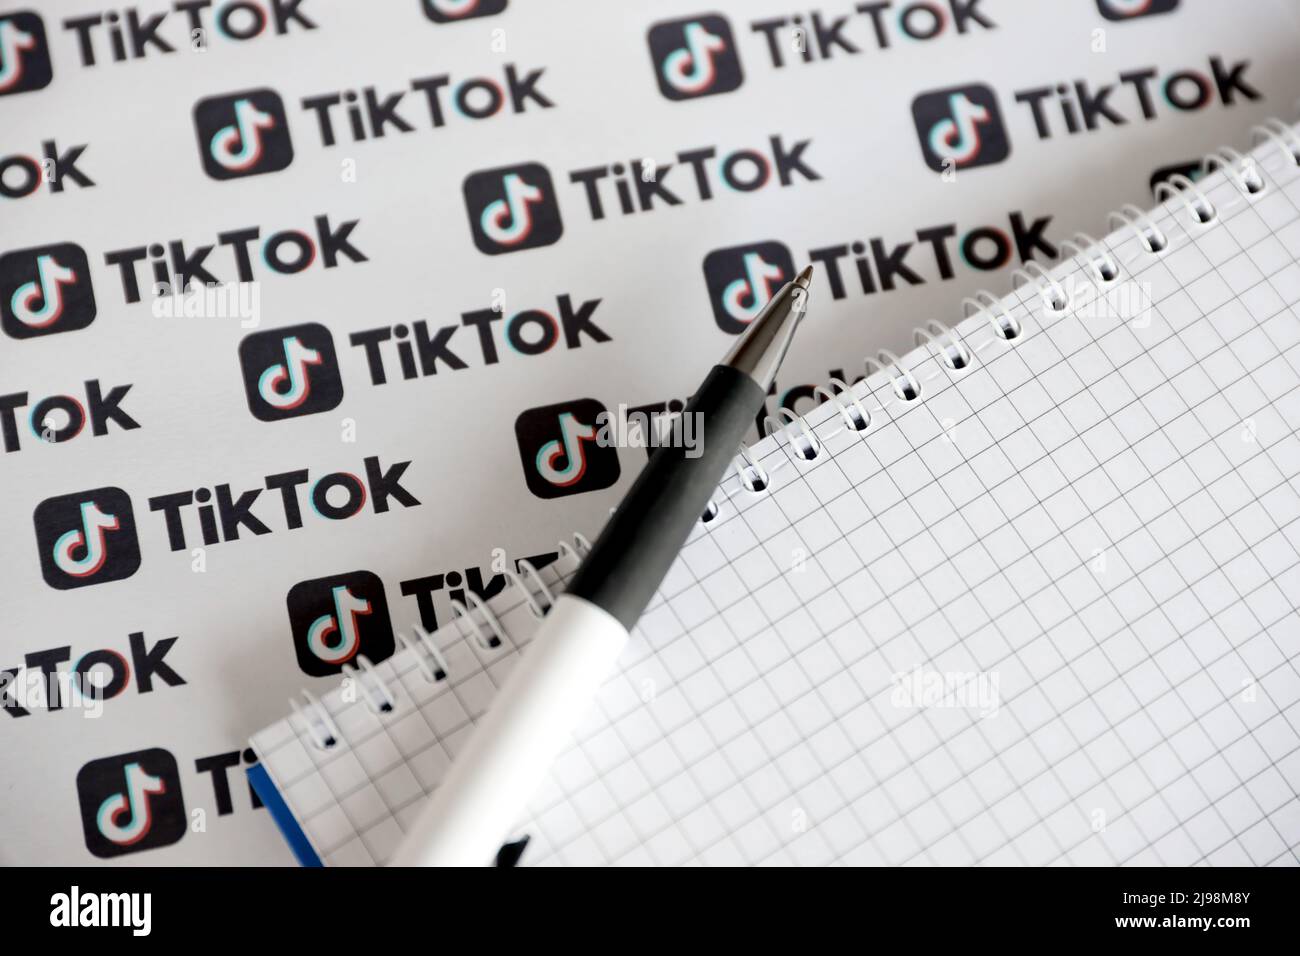 TERNOPIL, UKRAINE - MAY 2, 2022: Notepad with pen and Many TikTok logo printed on paper. Tiktok or Douyin is a famous Chinese short-form video hosting Stock Photo